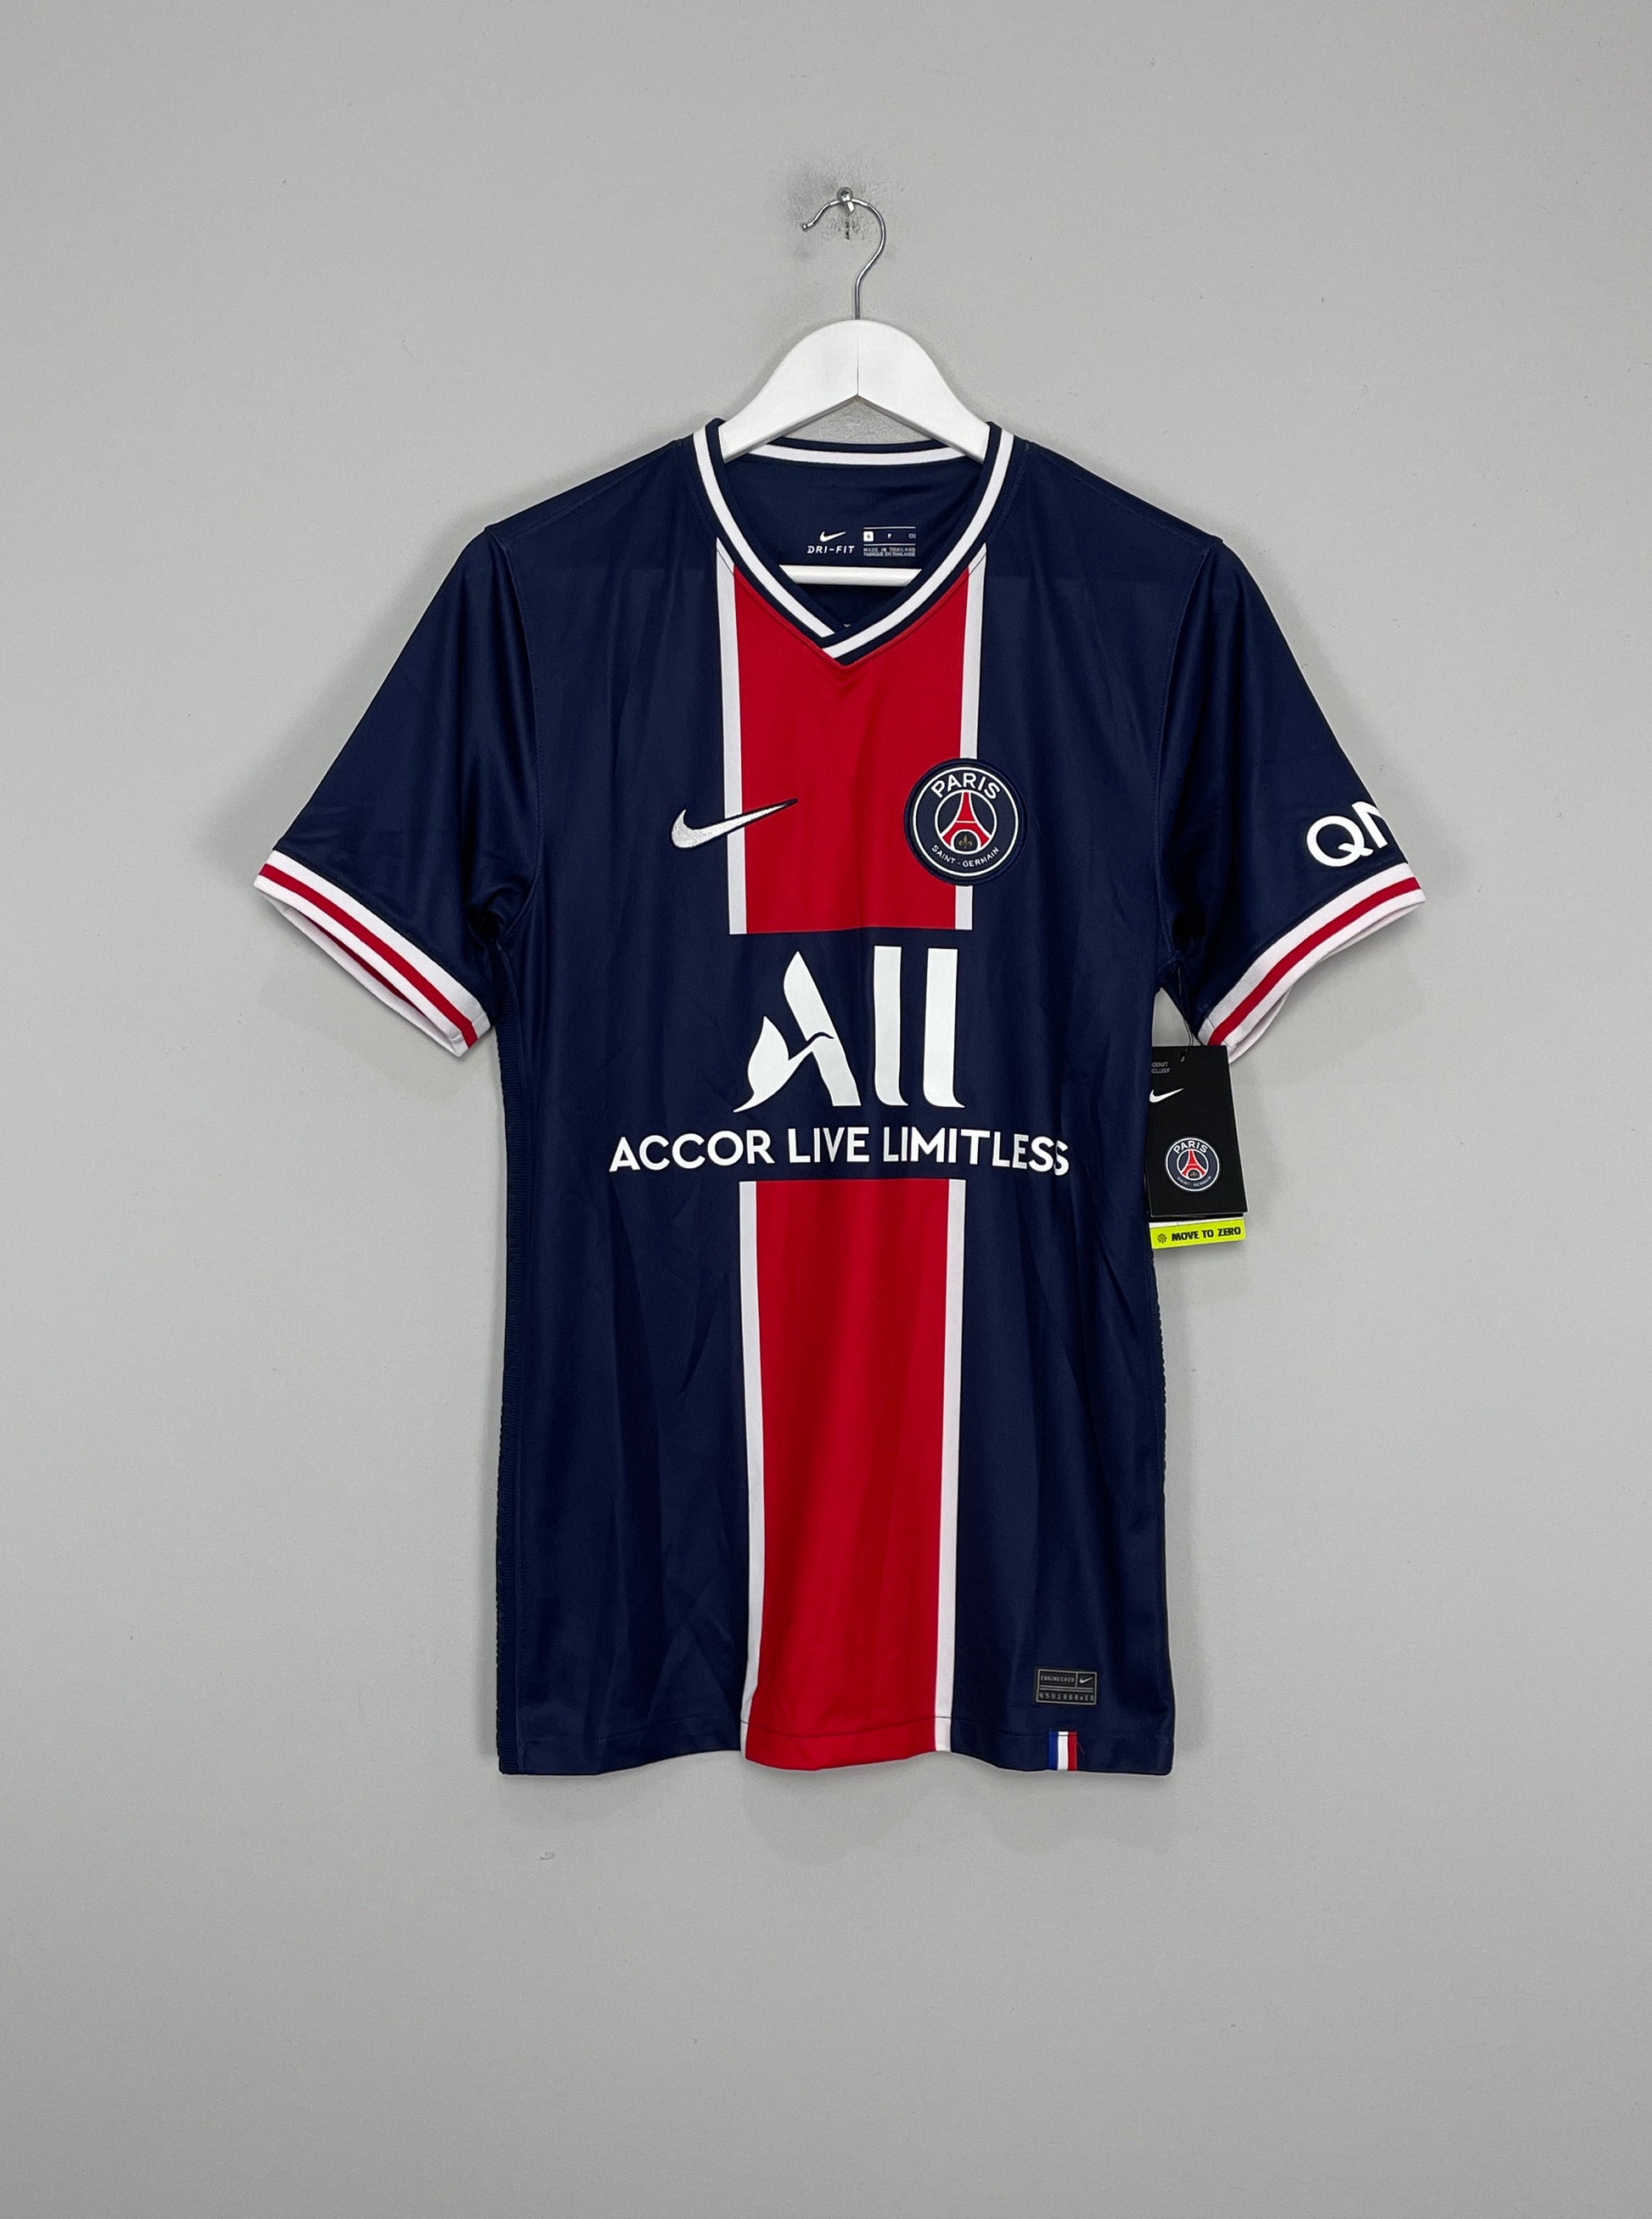 Image of the PSG shirt from the 2020/21 season